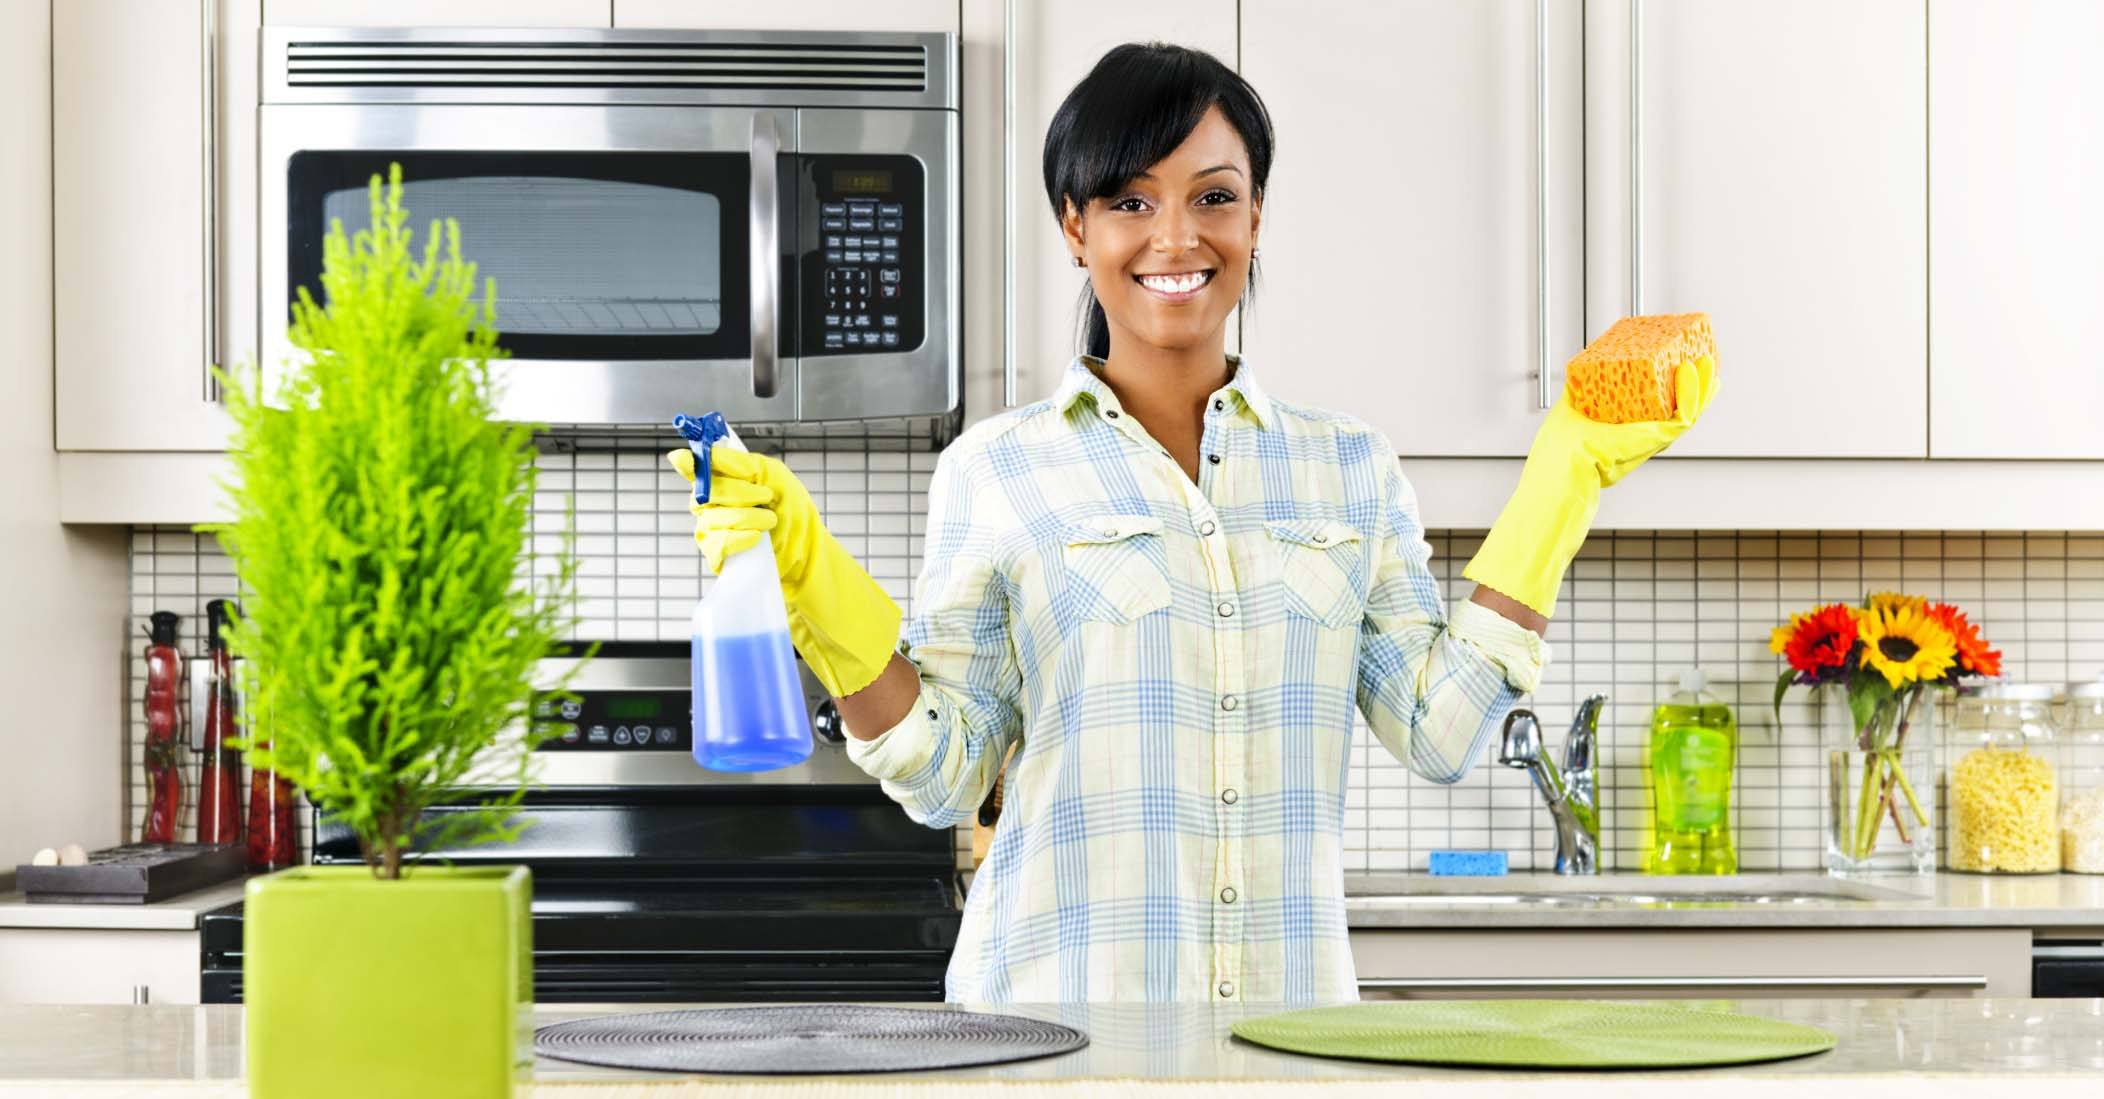 House cleaning jobs in London: 6 HOME CLEANING TIPS AND TRICKS